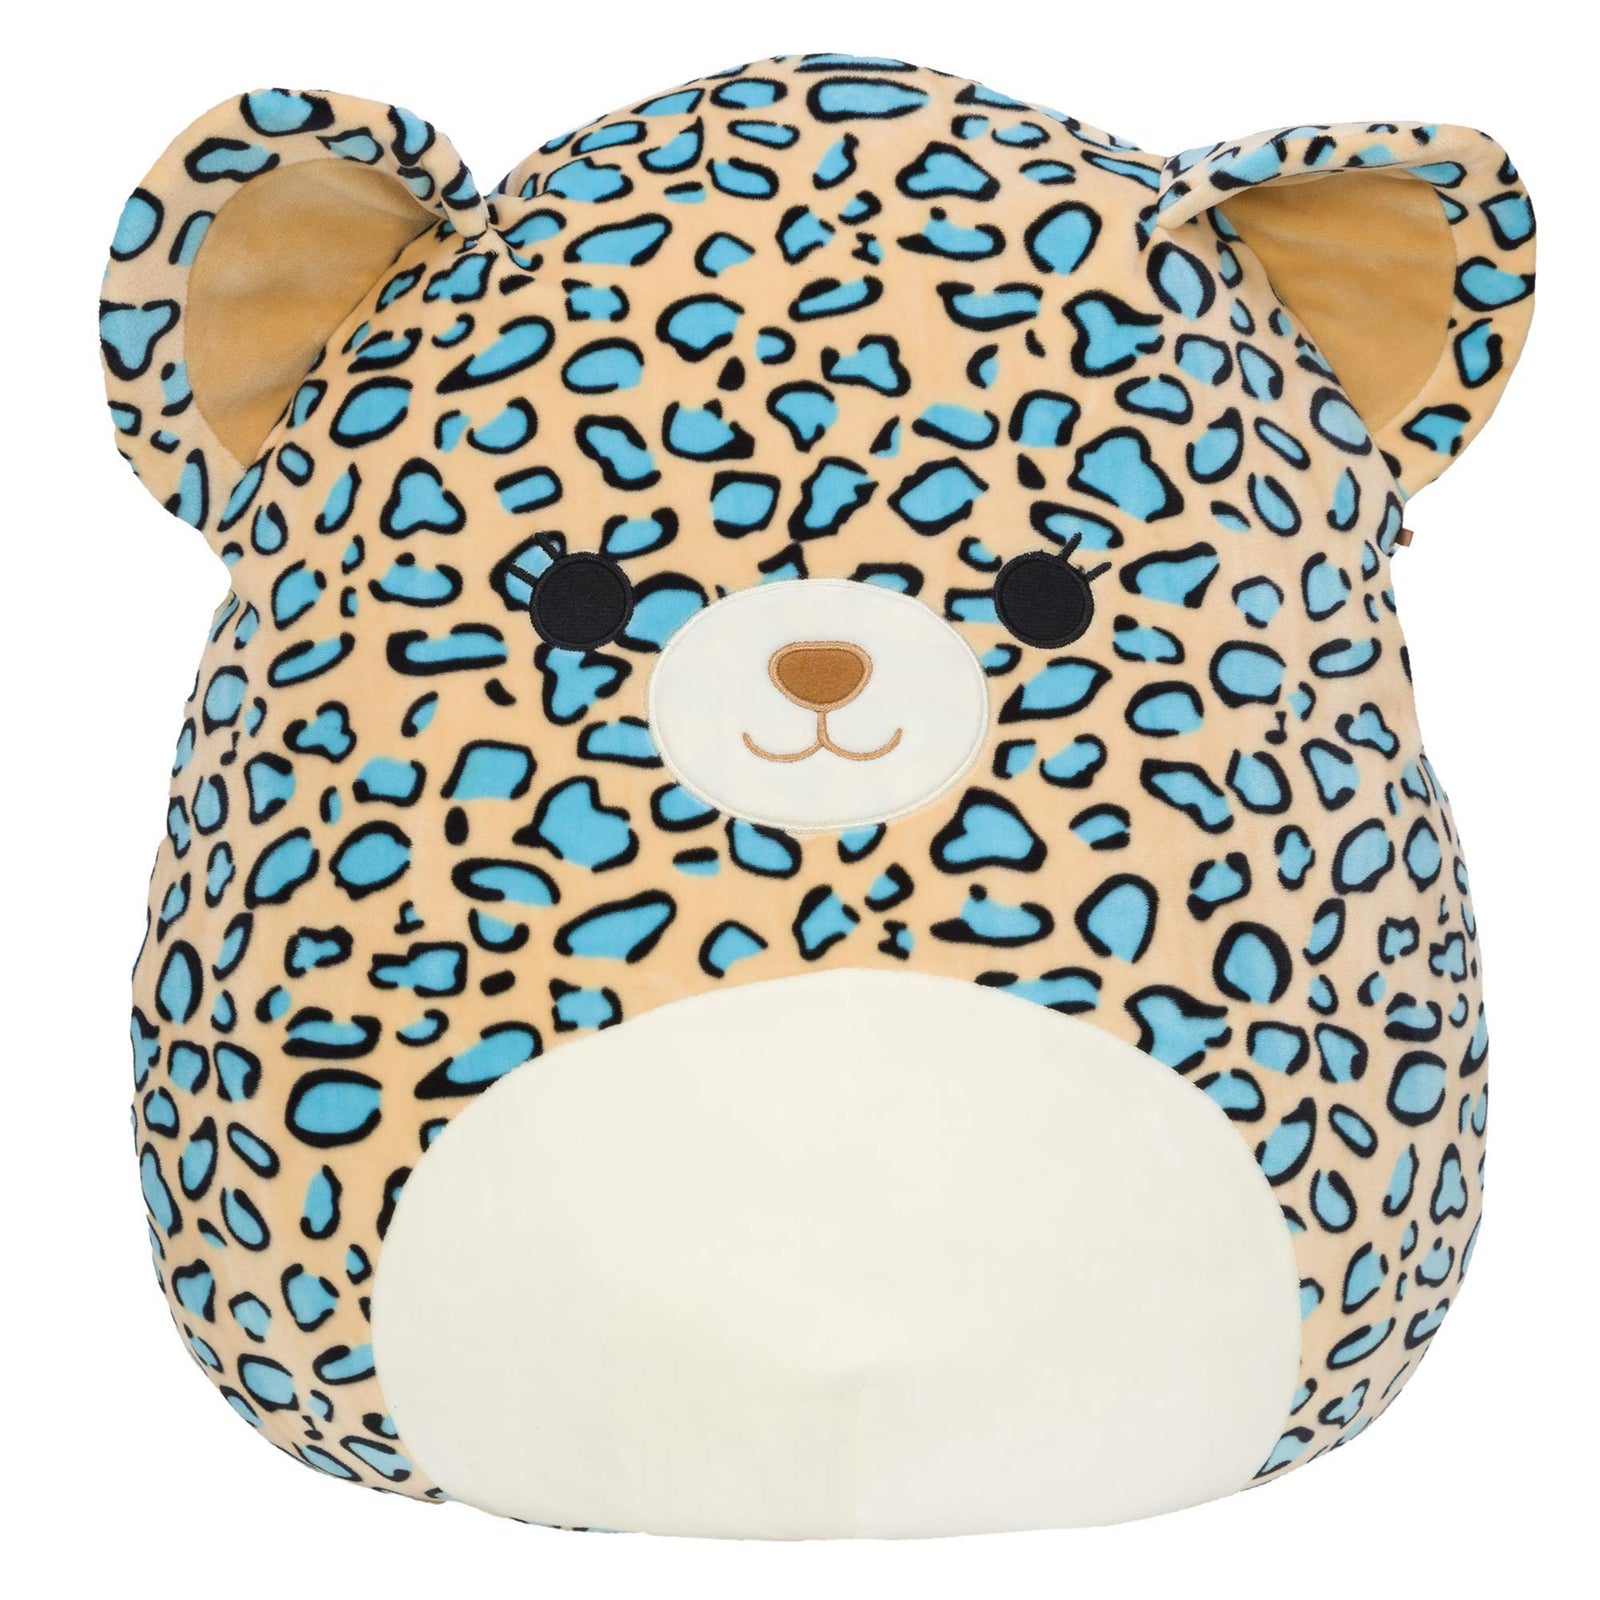 Squishmallow Official Kellytoy Plush 16" Liv The Teal Leopard - Ultrasoft Stuffed Animal Plush Toy